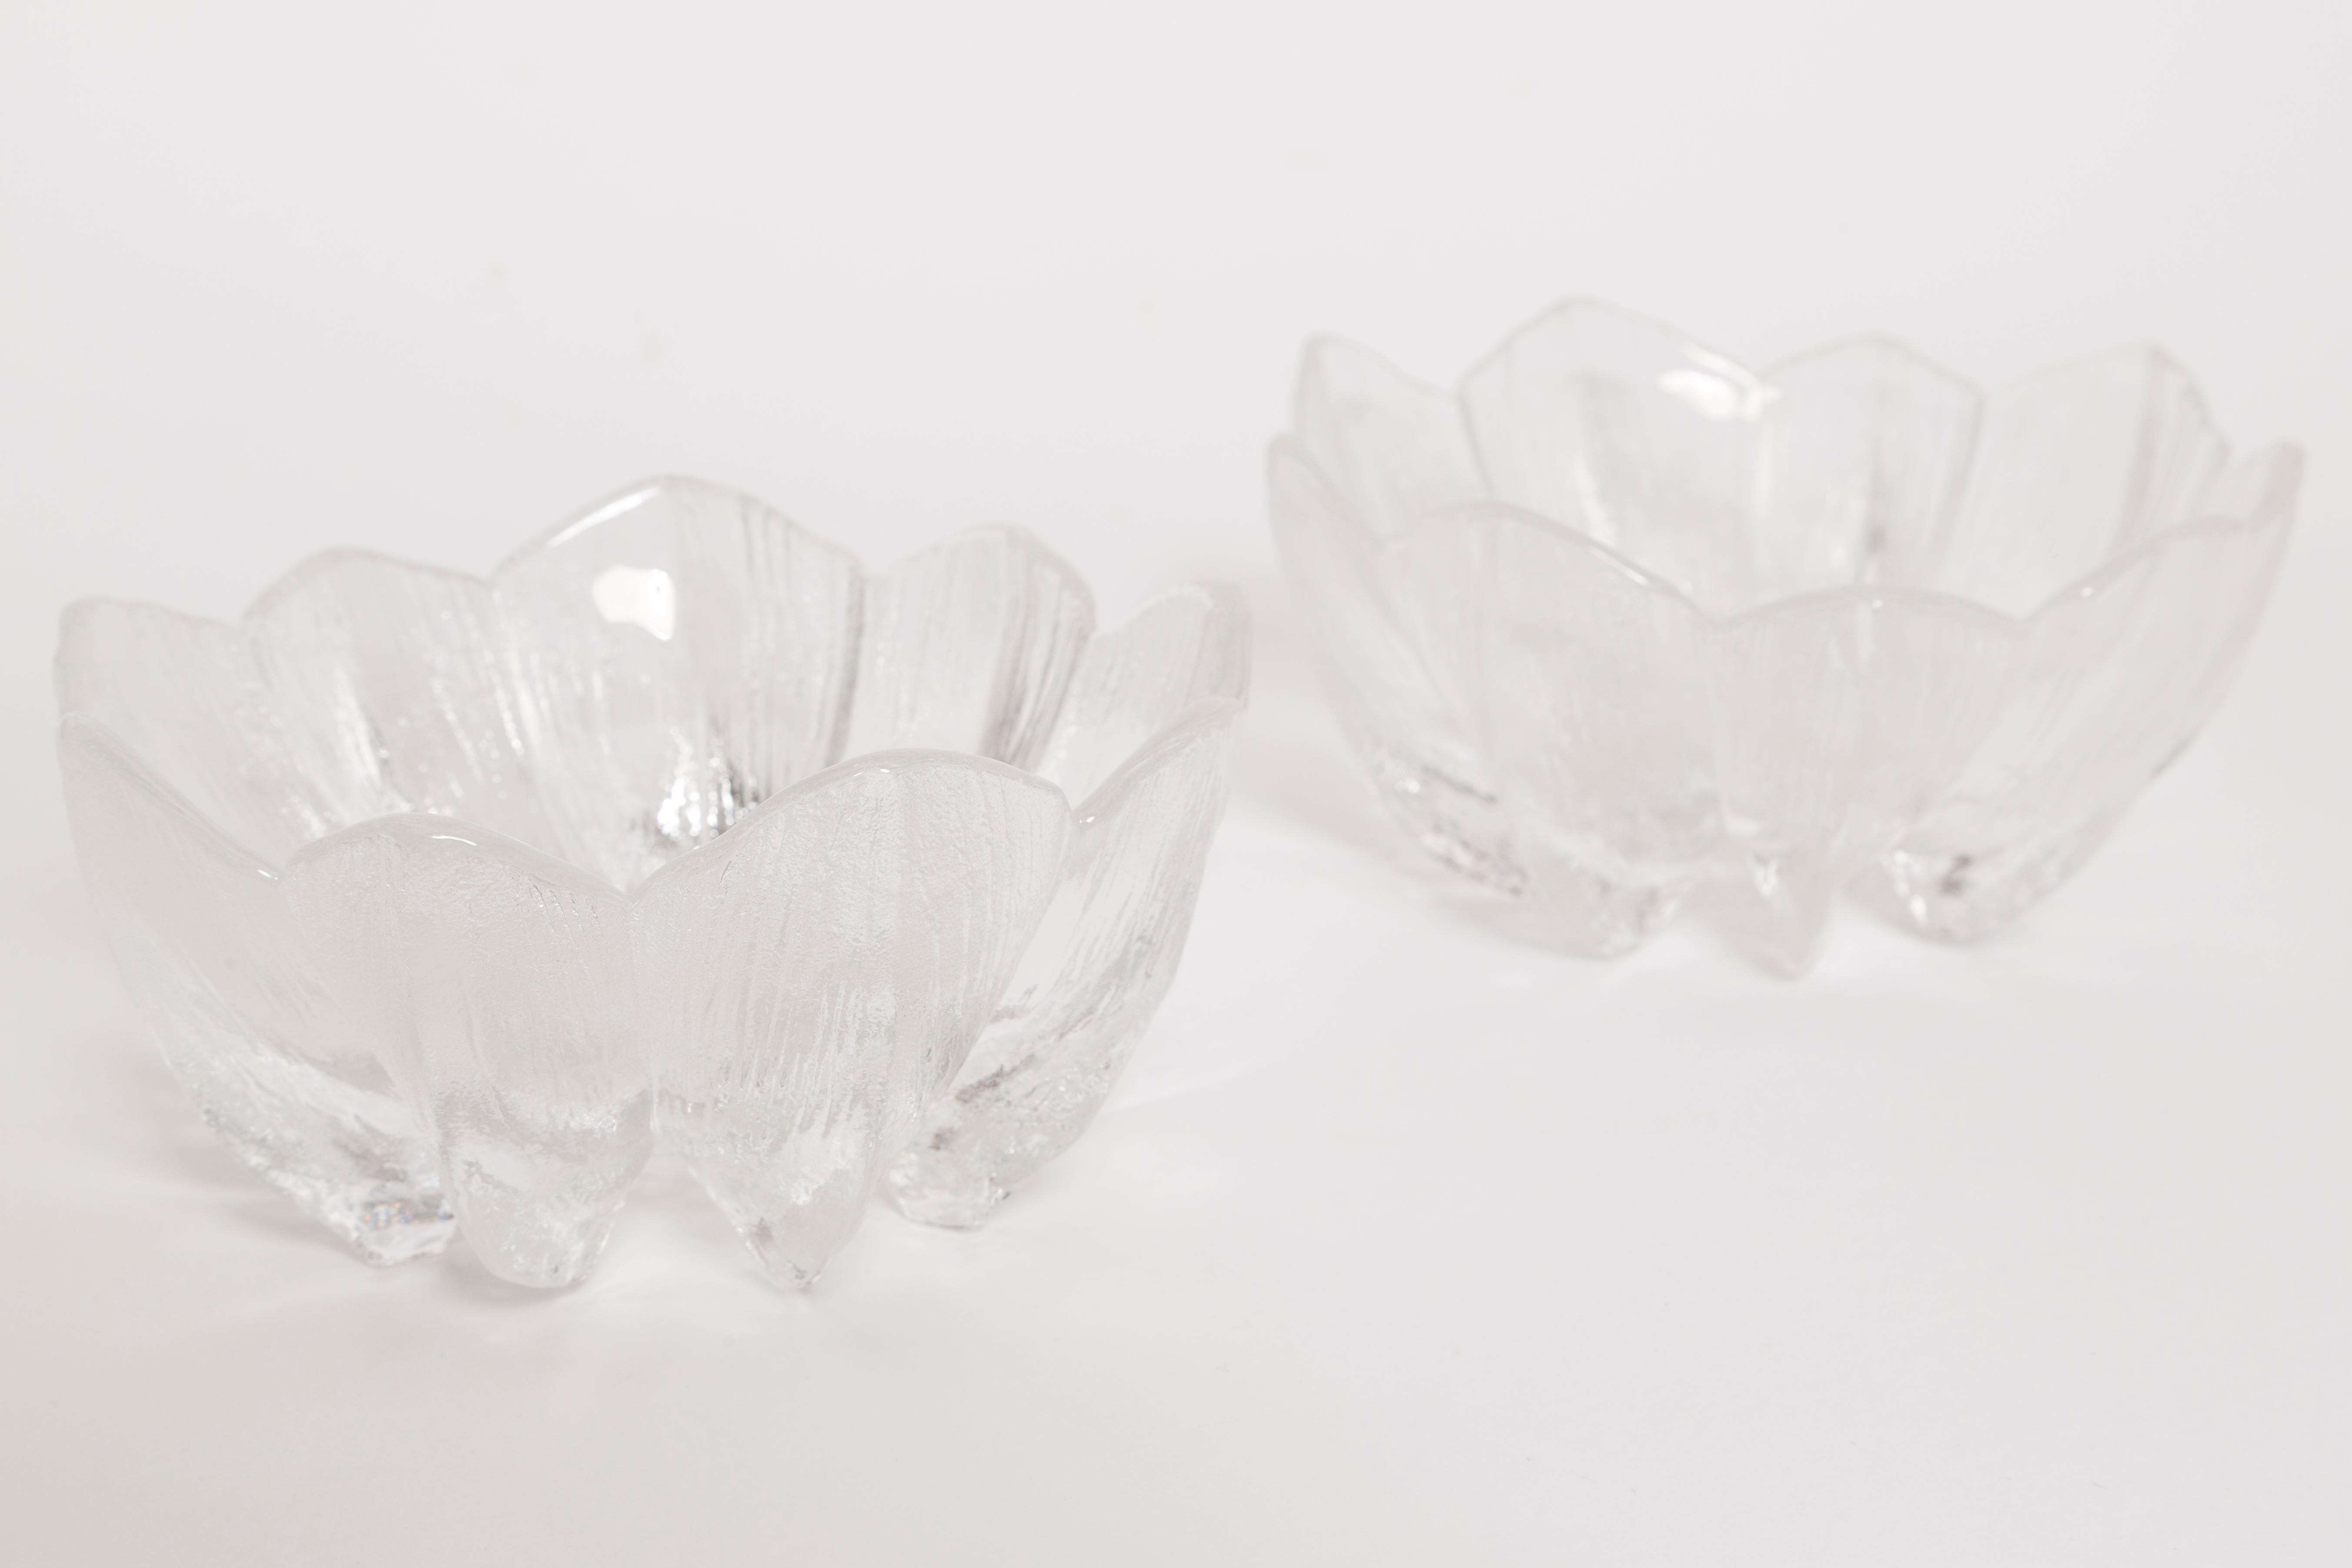 Pair of decorative transparent basket bowls designed by Jan Sylwester Drost in 1960s from Poland. Bowls are in very good vintage condition, no damage or cracks. Original glass. Beautiful piece for every interior! Only one unique set.

About the